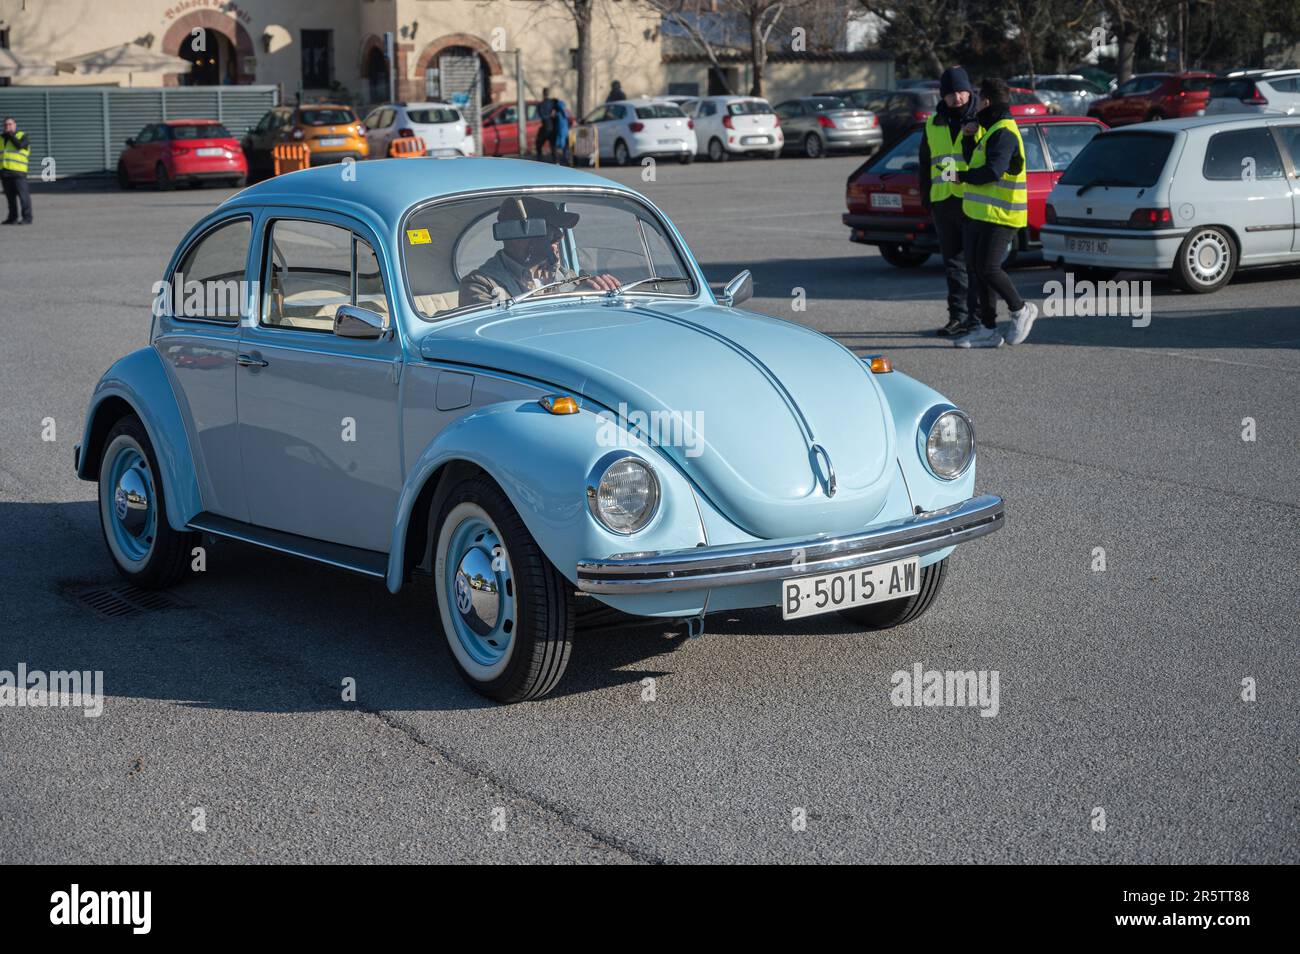 A classic sky blue Volkswagen type 1, driving on the street Stock Photo